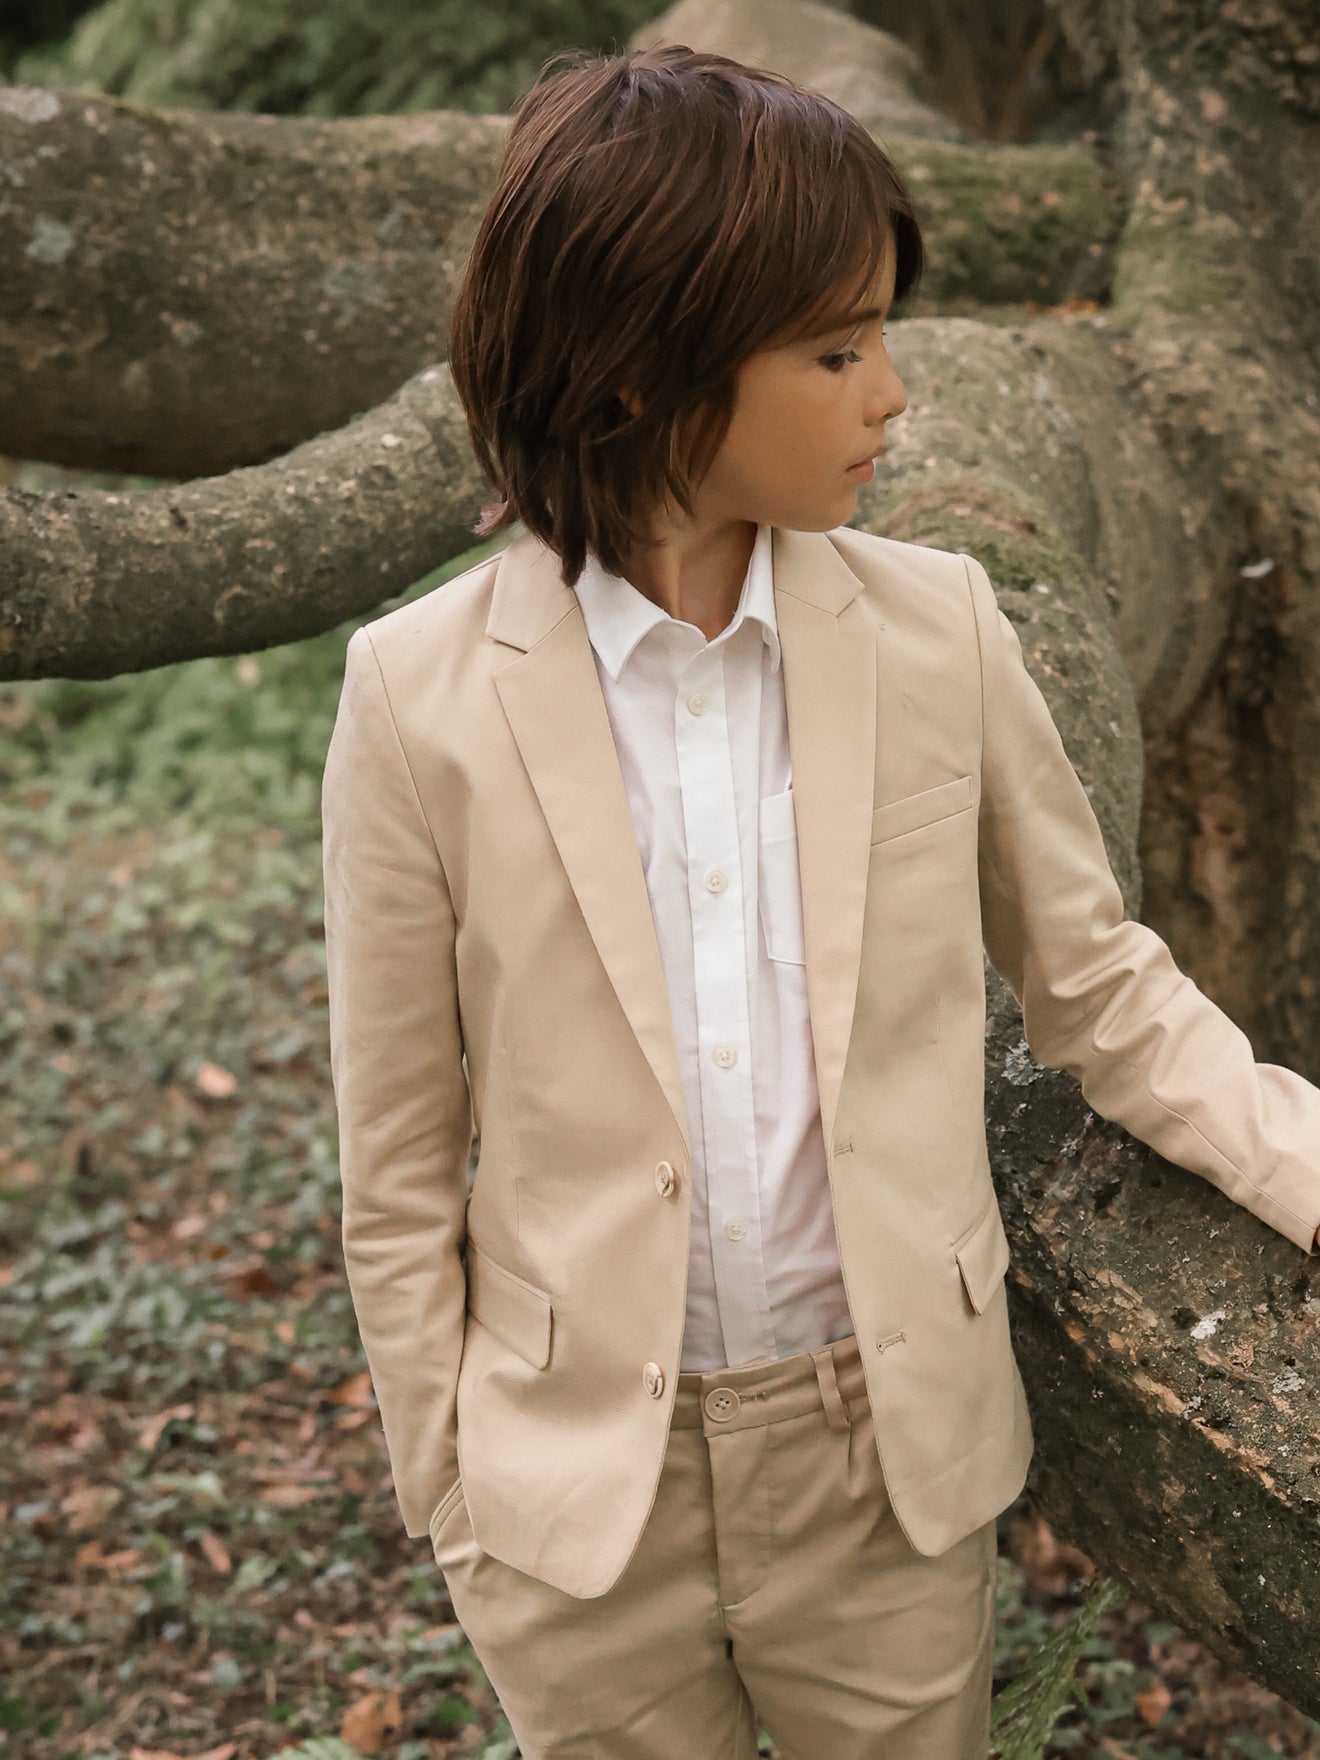 Boy's suit jacket - Partywear and Bridal Collection